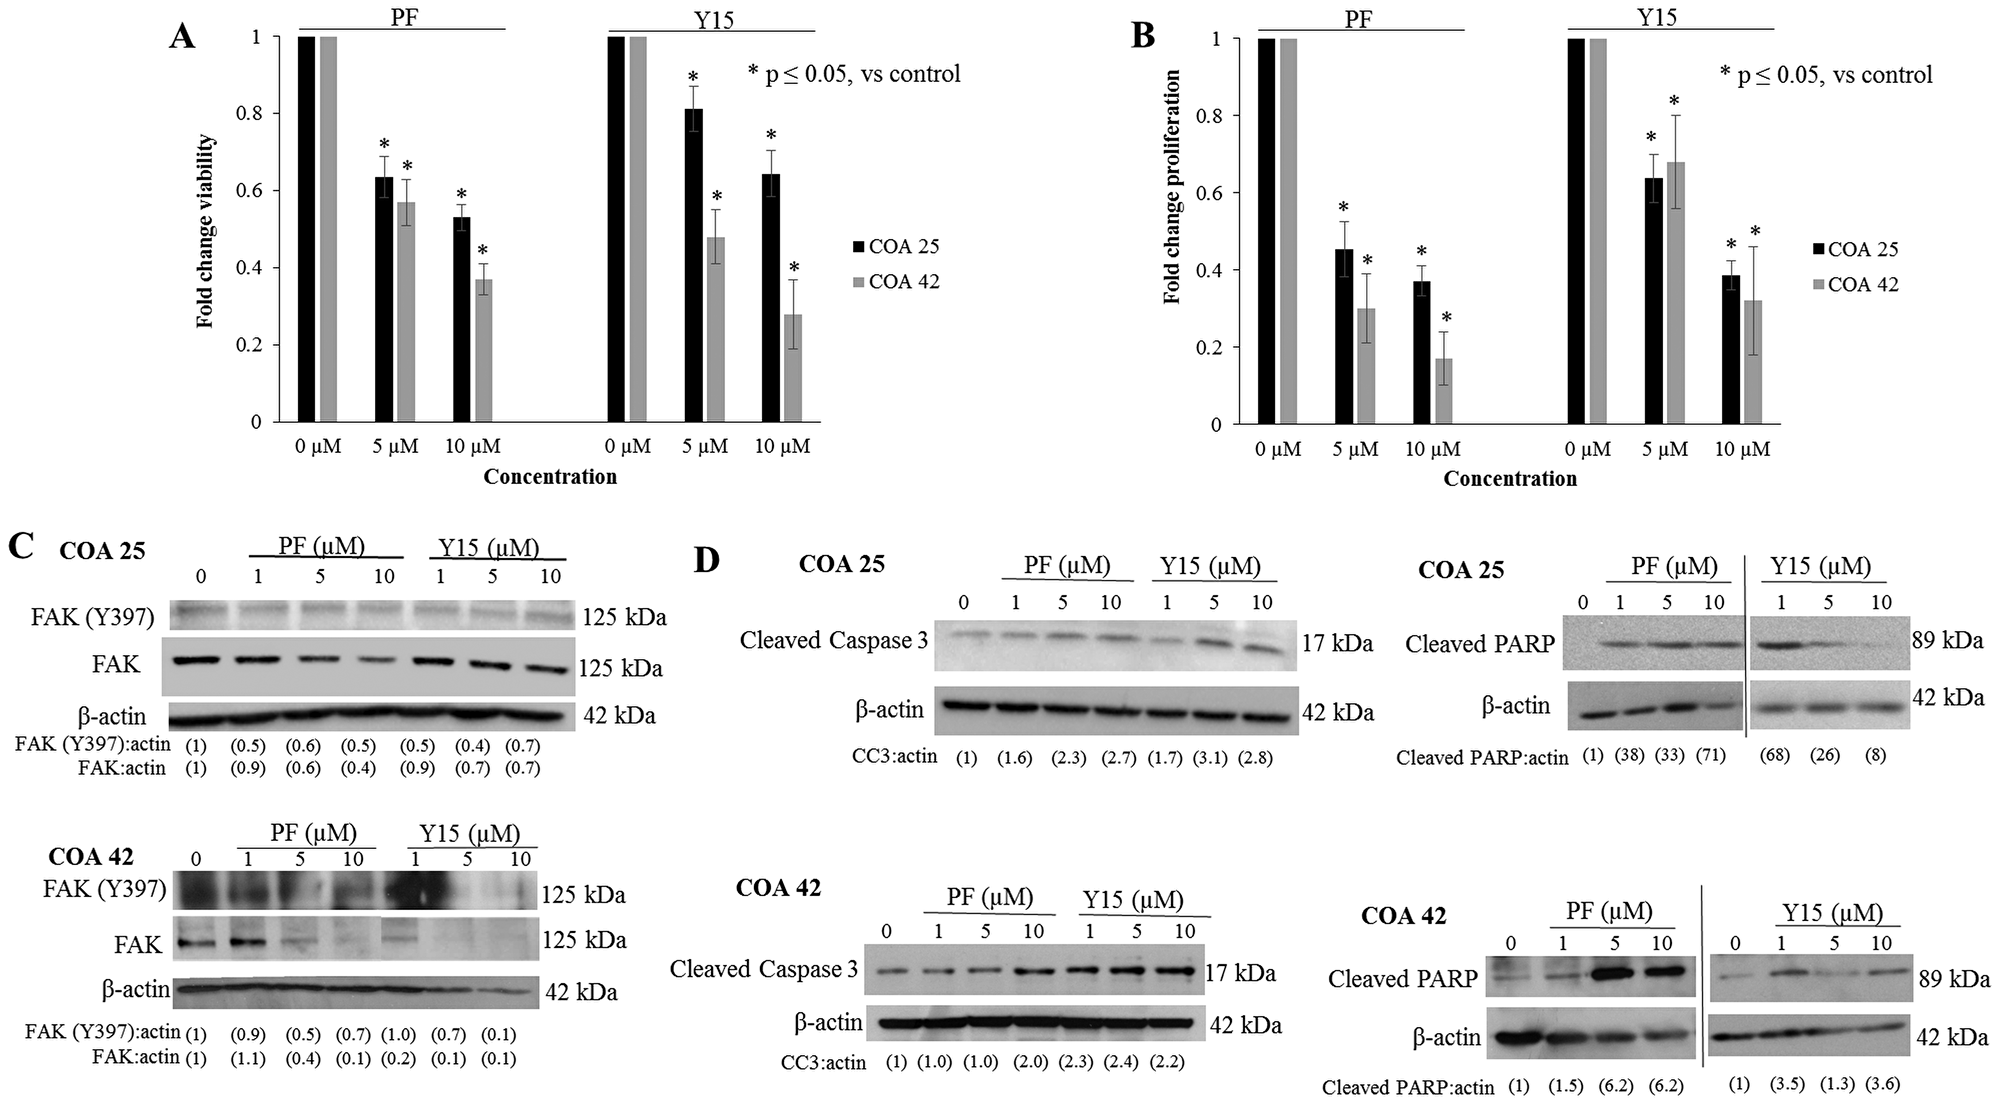 PF-573,228 (PF) and 1,2,4,5-benzenetetraamine tetrahydrochloride (Y15) inhibition of FAK decreased cell survival and proliferation and increased apoptosis.